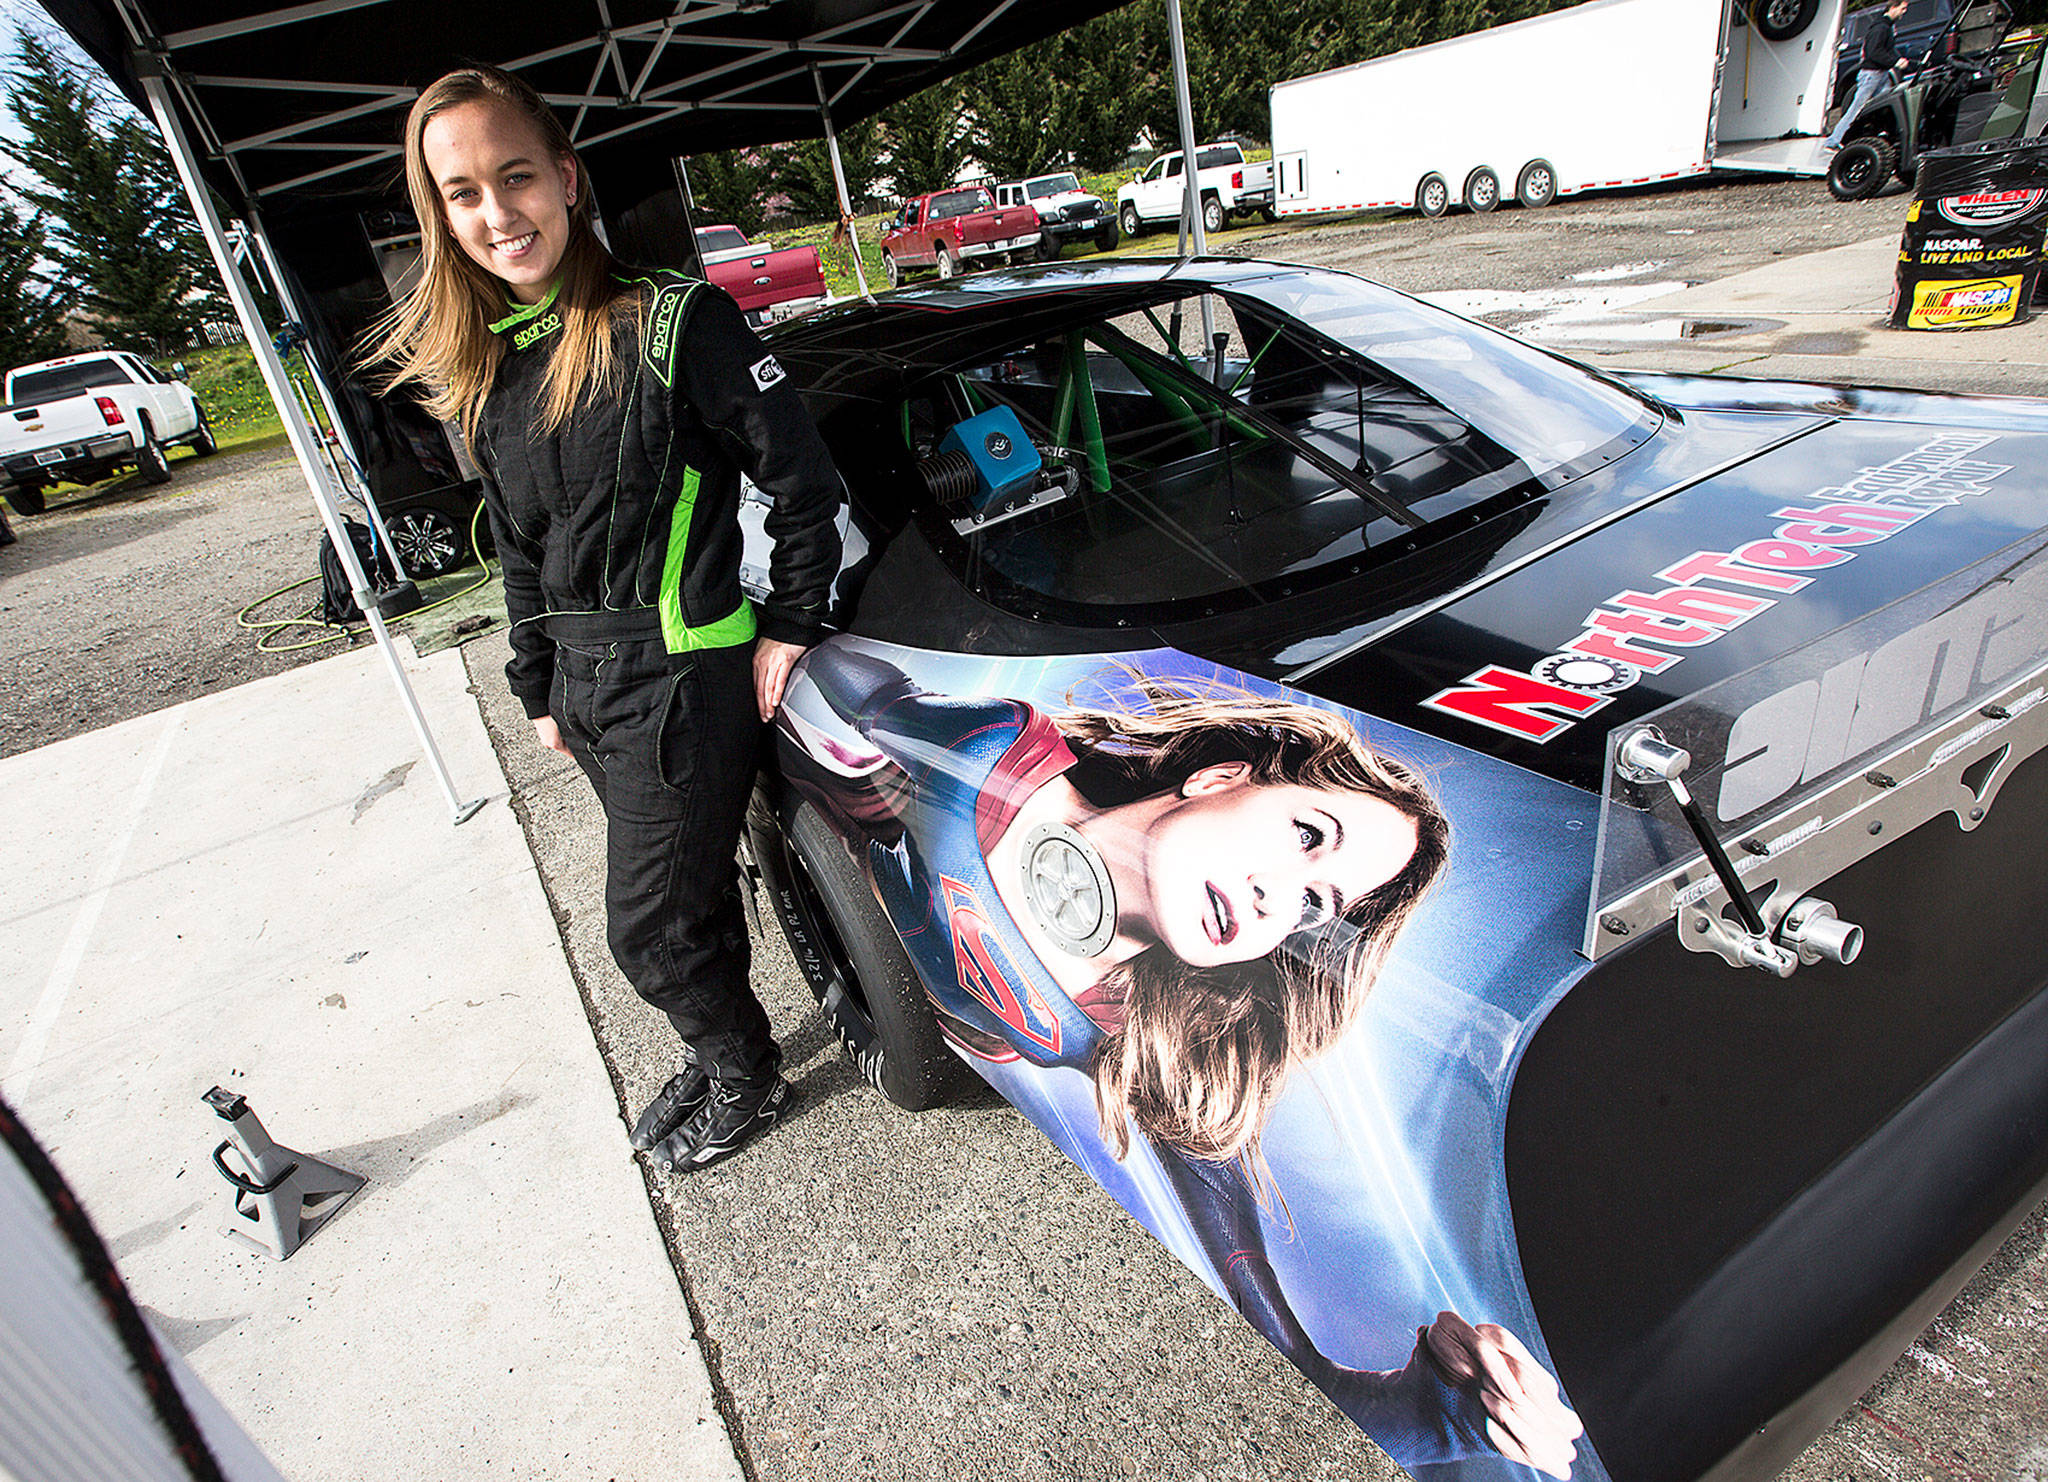 Brittney Zamora stands next to her “Supergirl” Super Late Model race car at the Evergreen Speedway. (Ian Terry / The Herald)